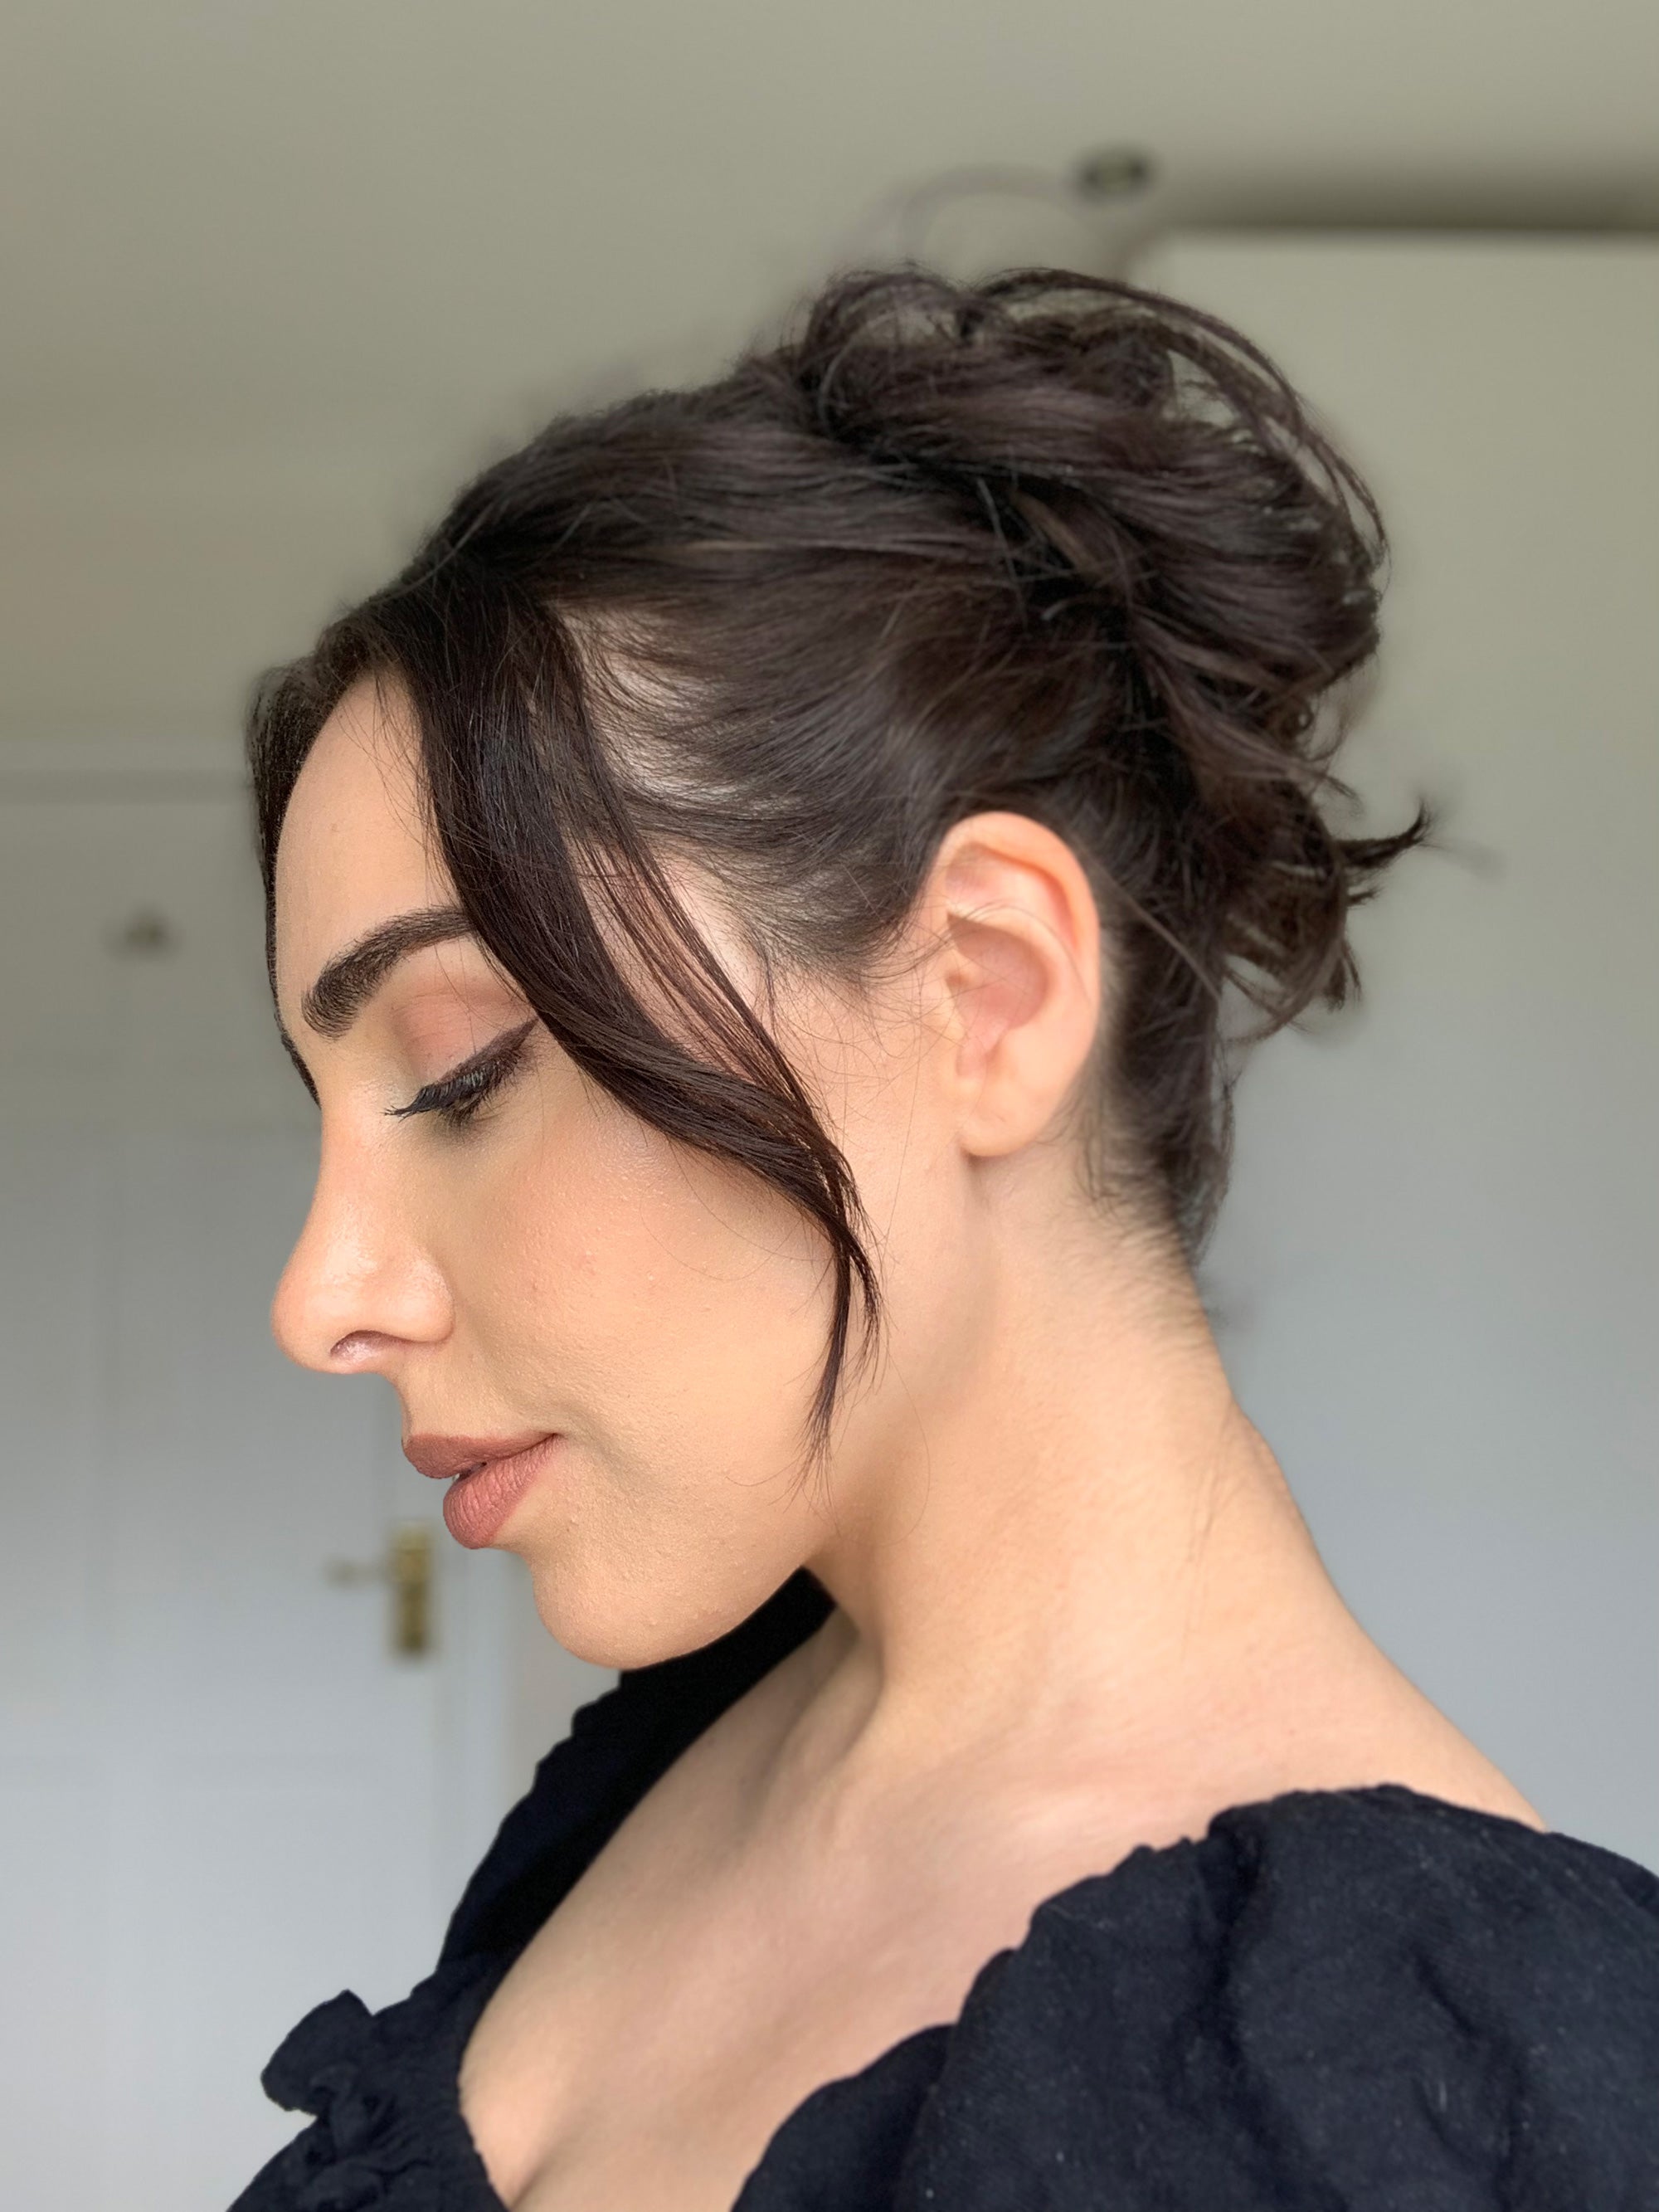 30 Natural Hair Bun Styles to Try in 2022 - PureWow